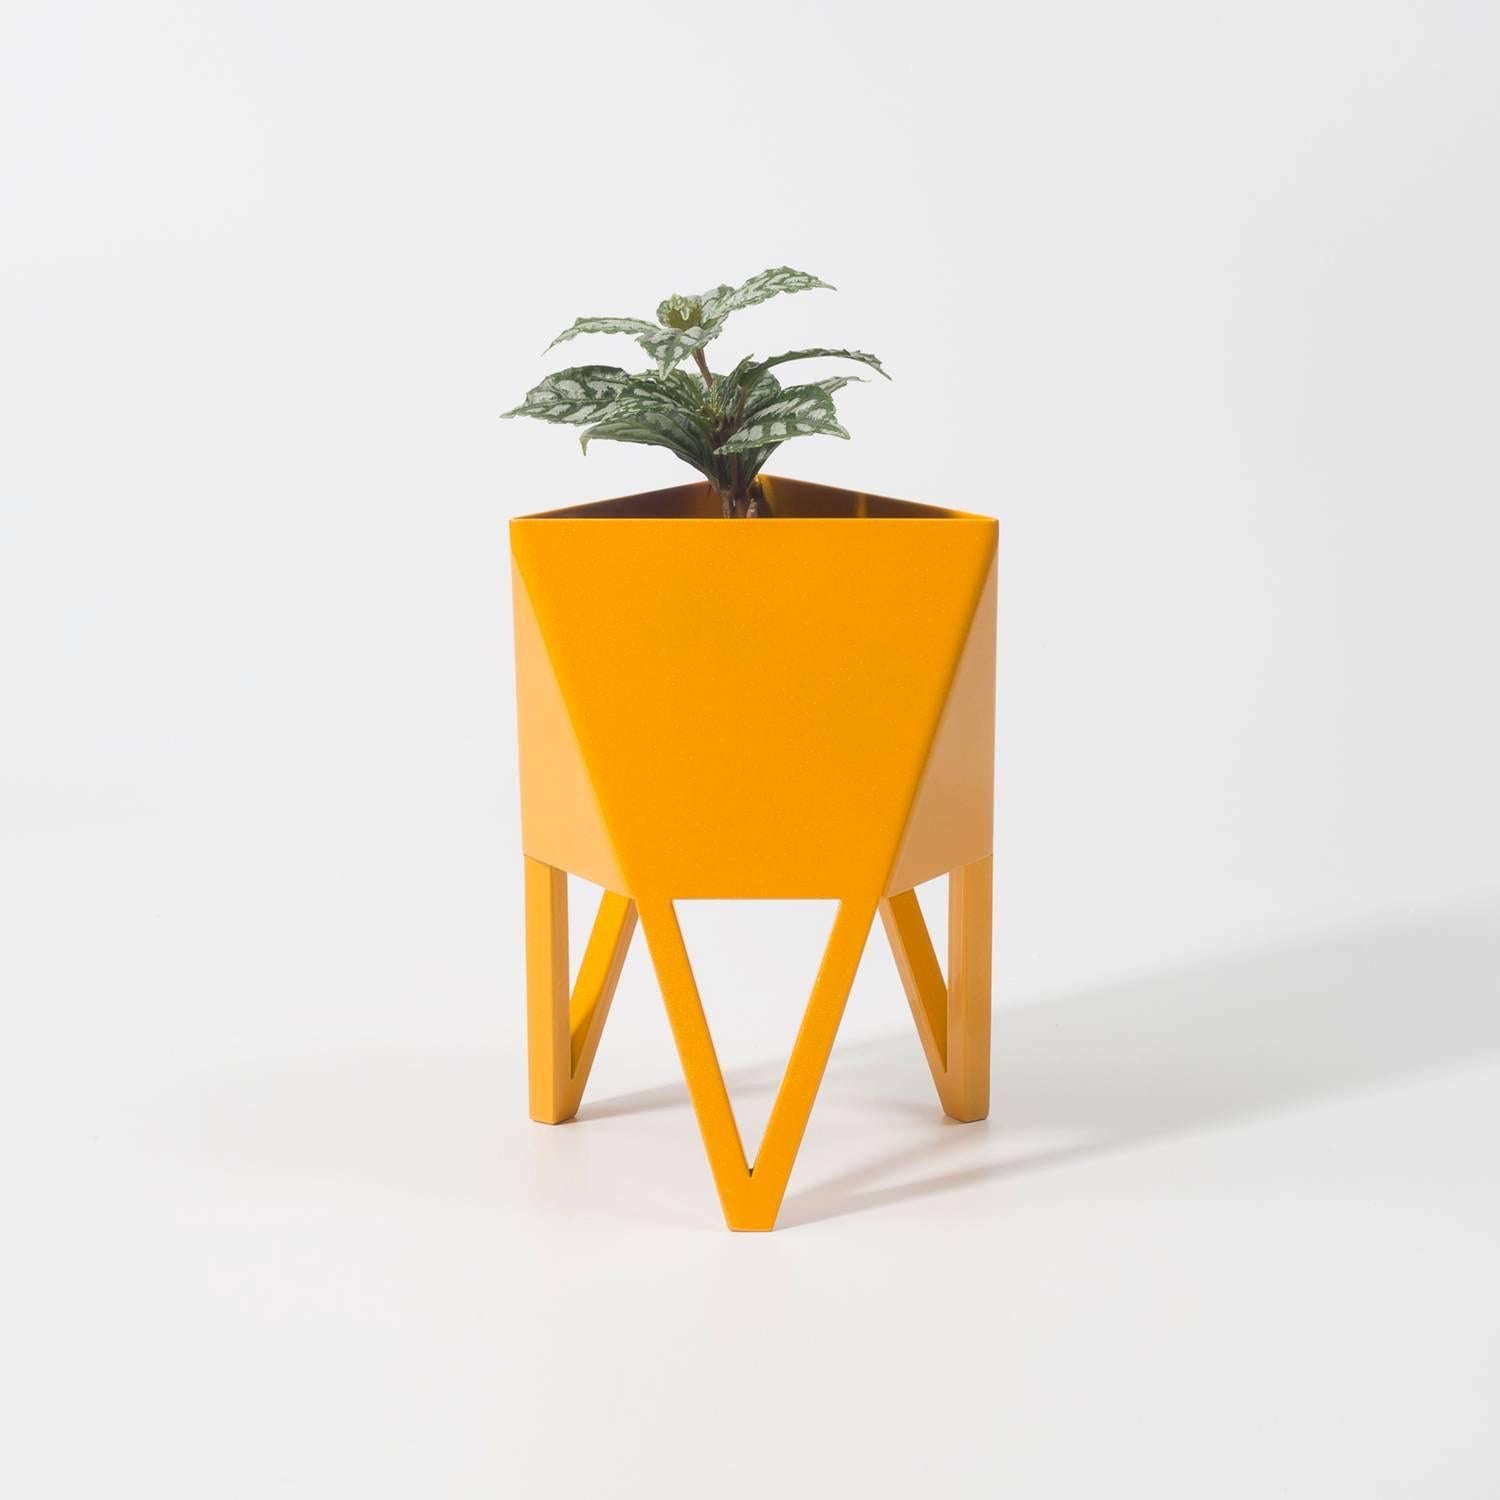 Deca Planter in Glossy White Steel, Medium, by Force/Collide 5